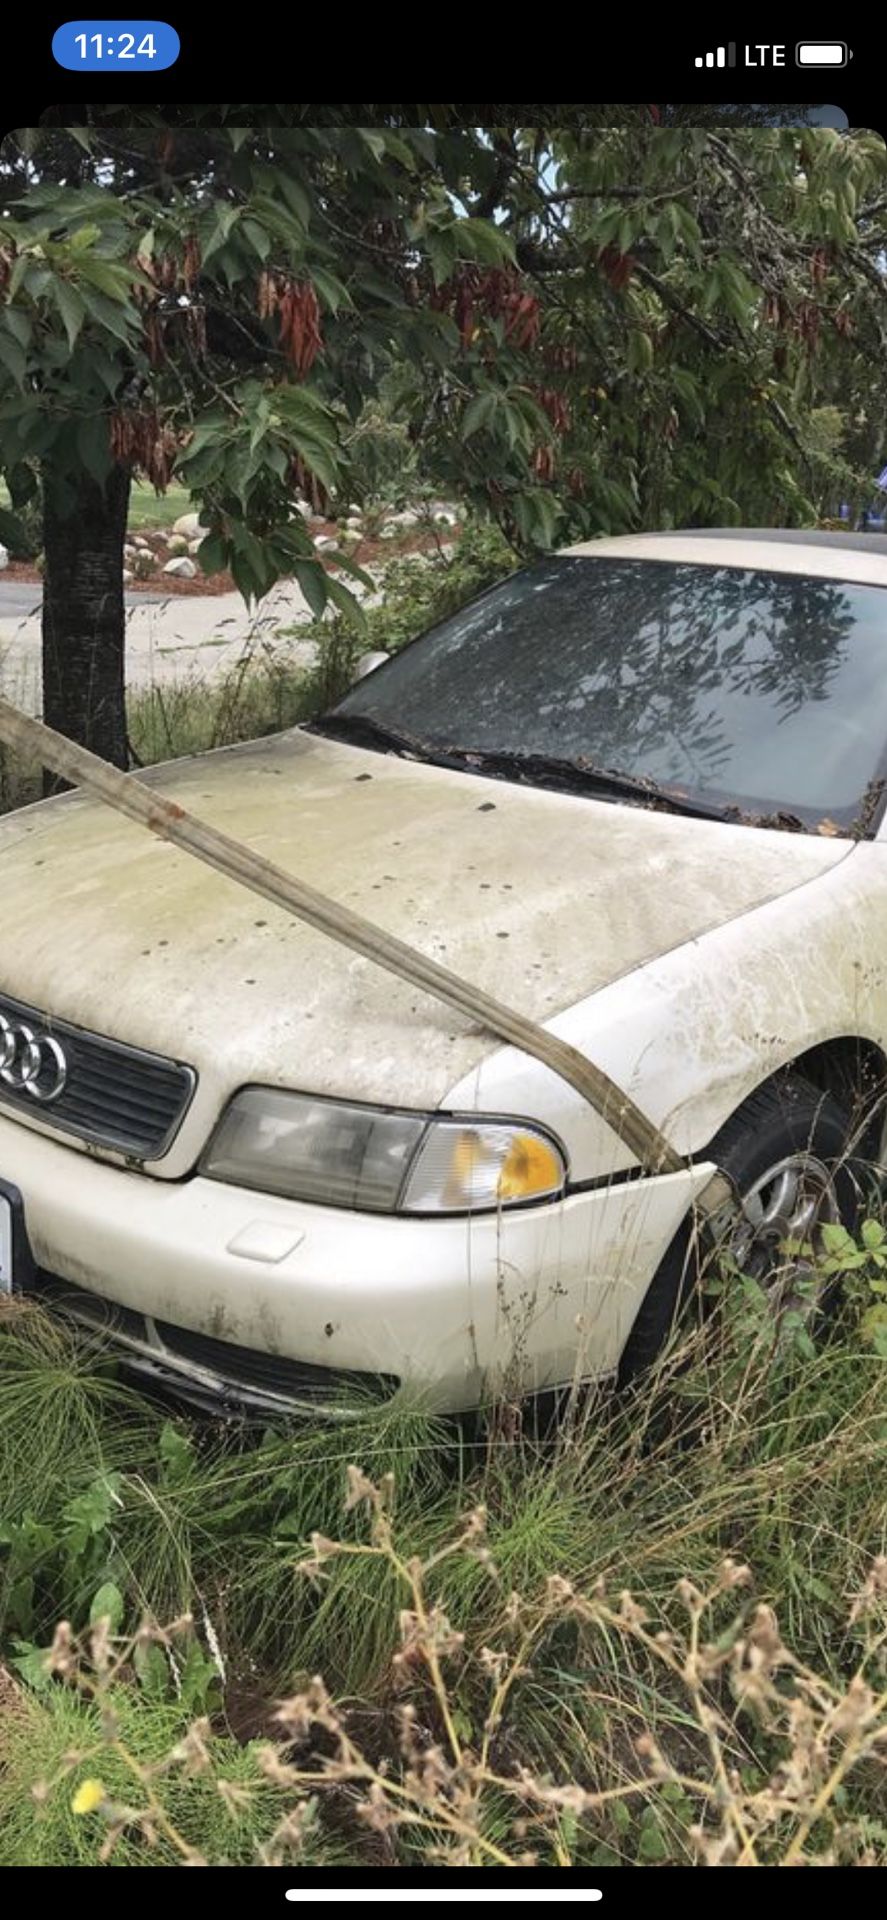 2006 Audi A4 ask me for parts that you need